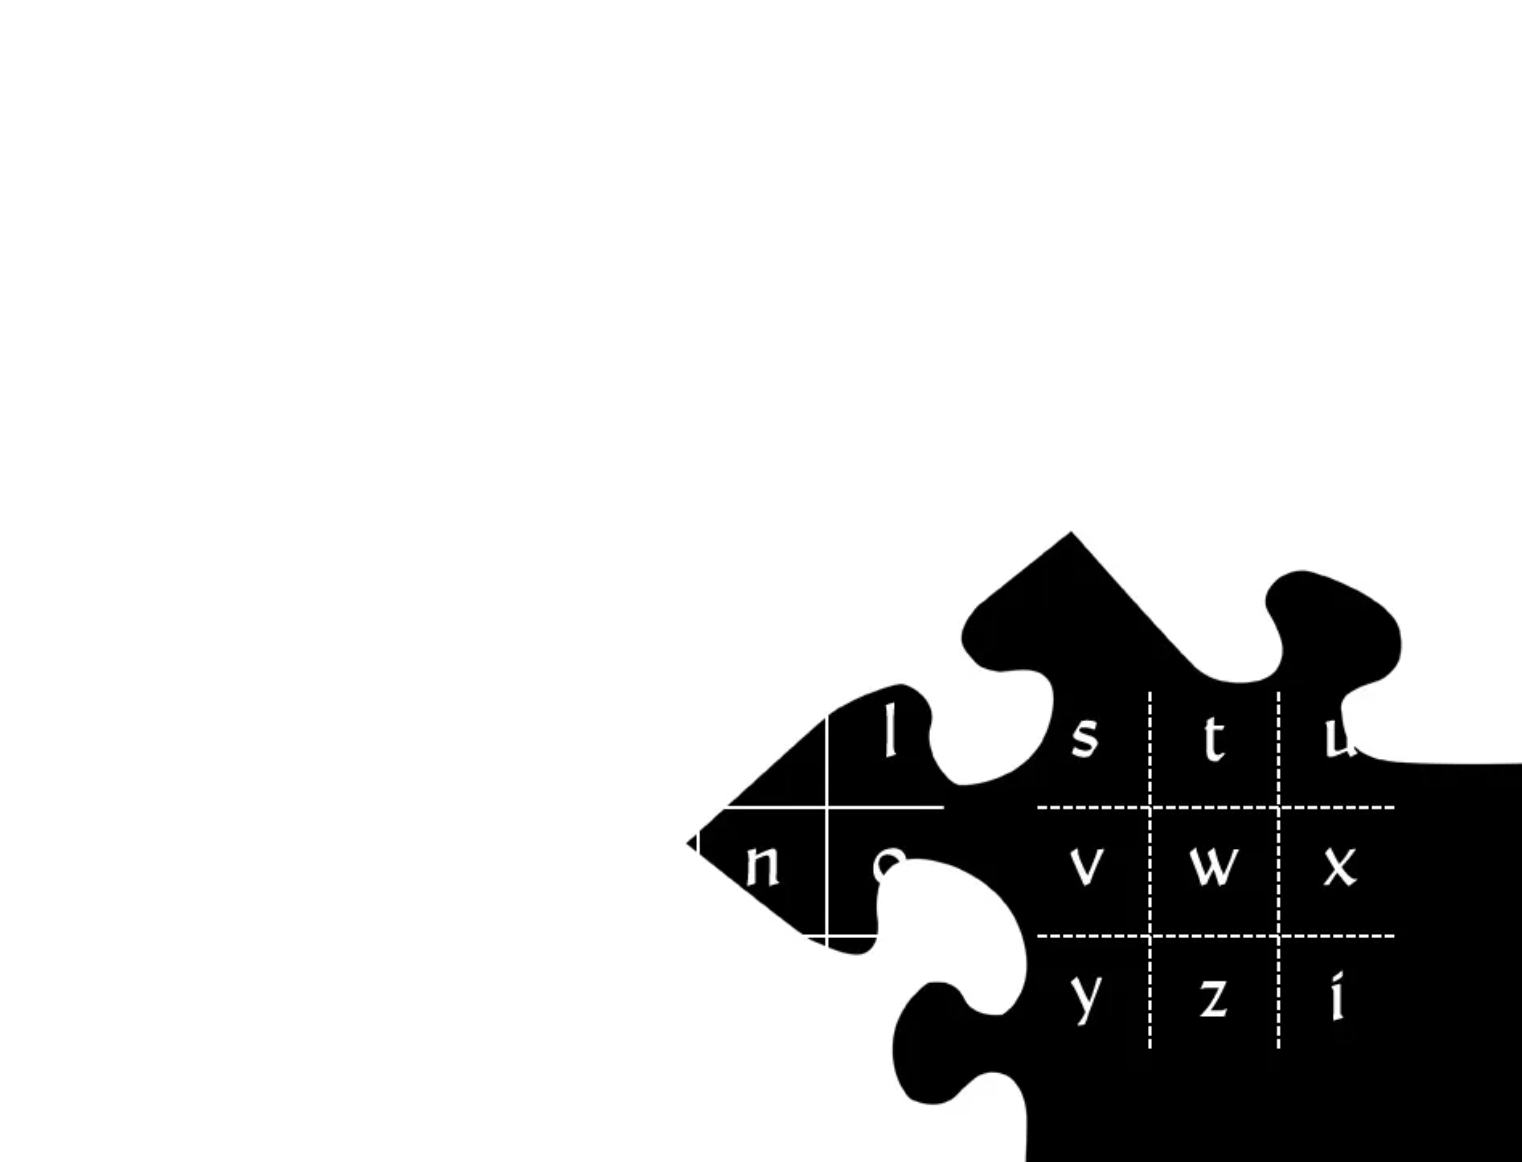 Black puzzle piece with parts of the alphabet in a 3 x 3 grid as the first mystery code clue.